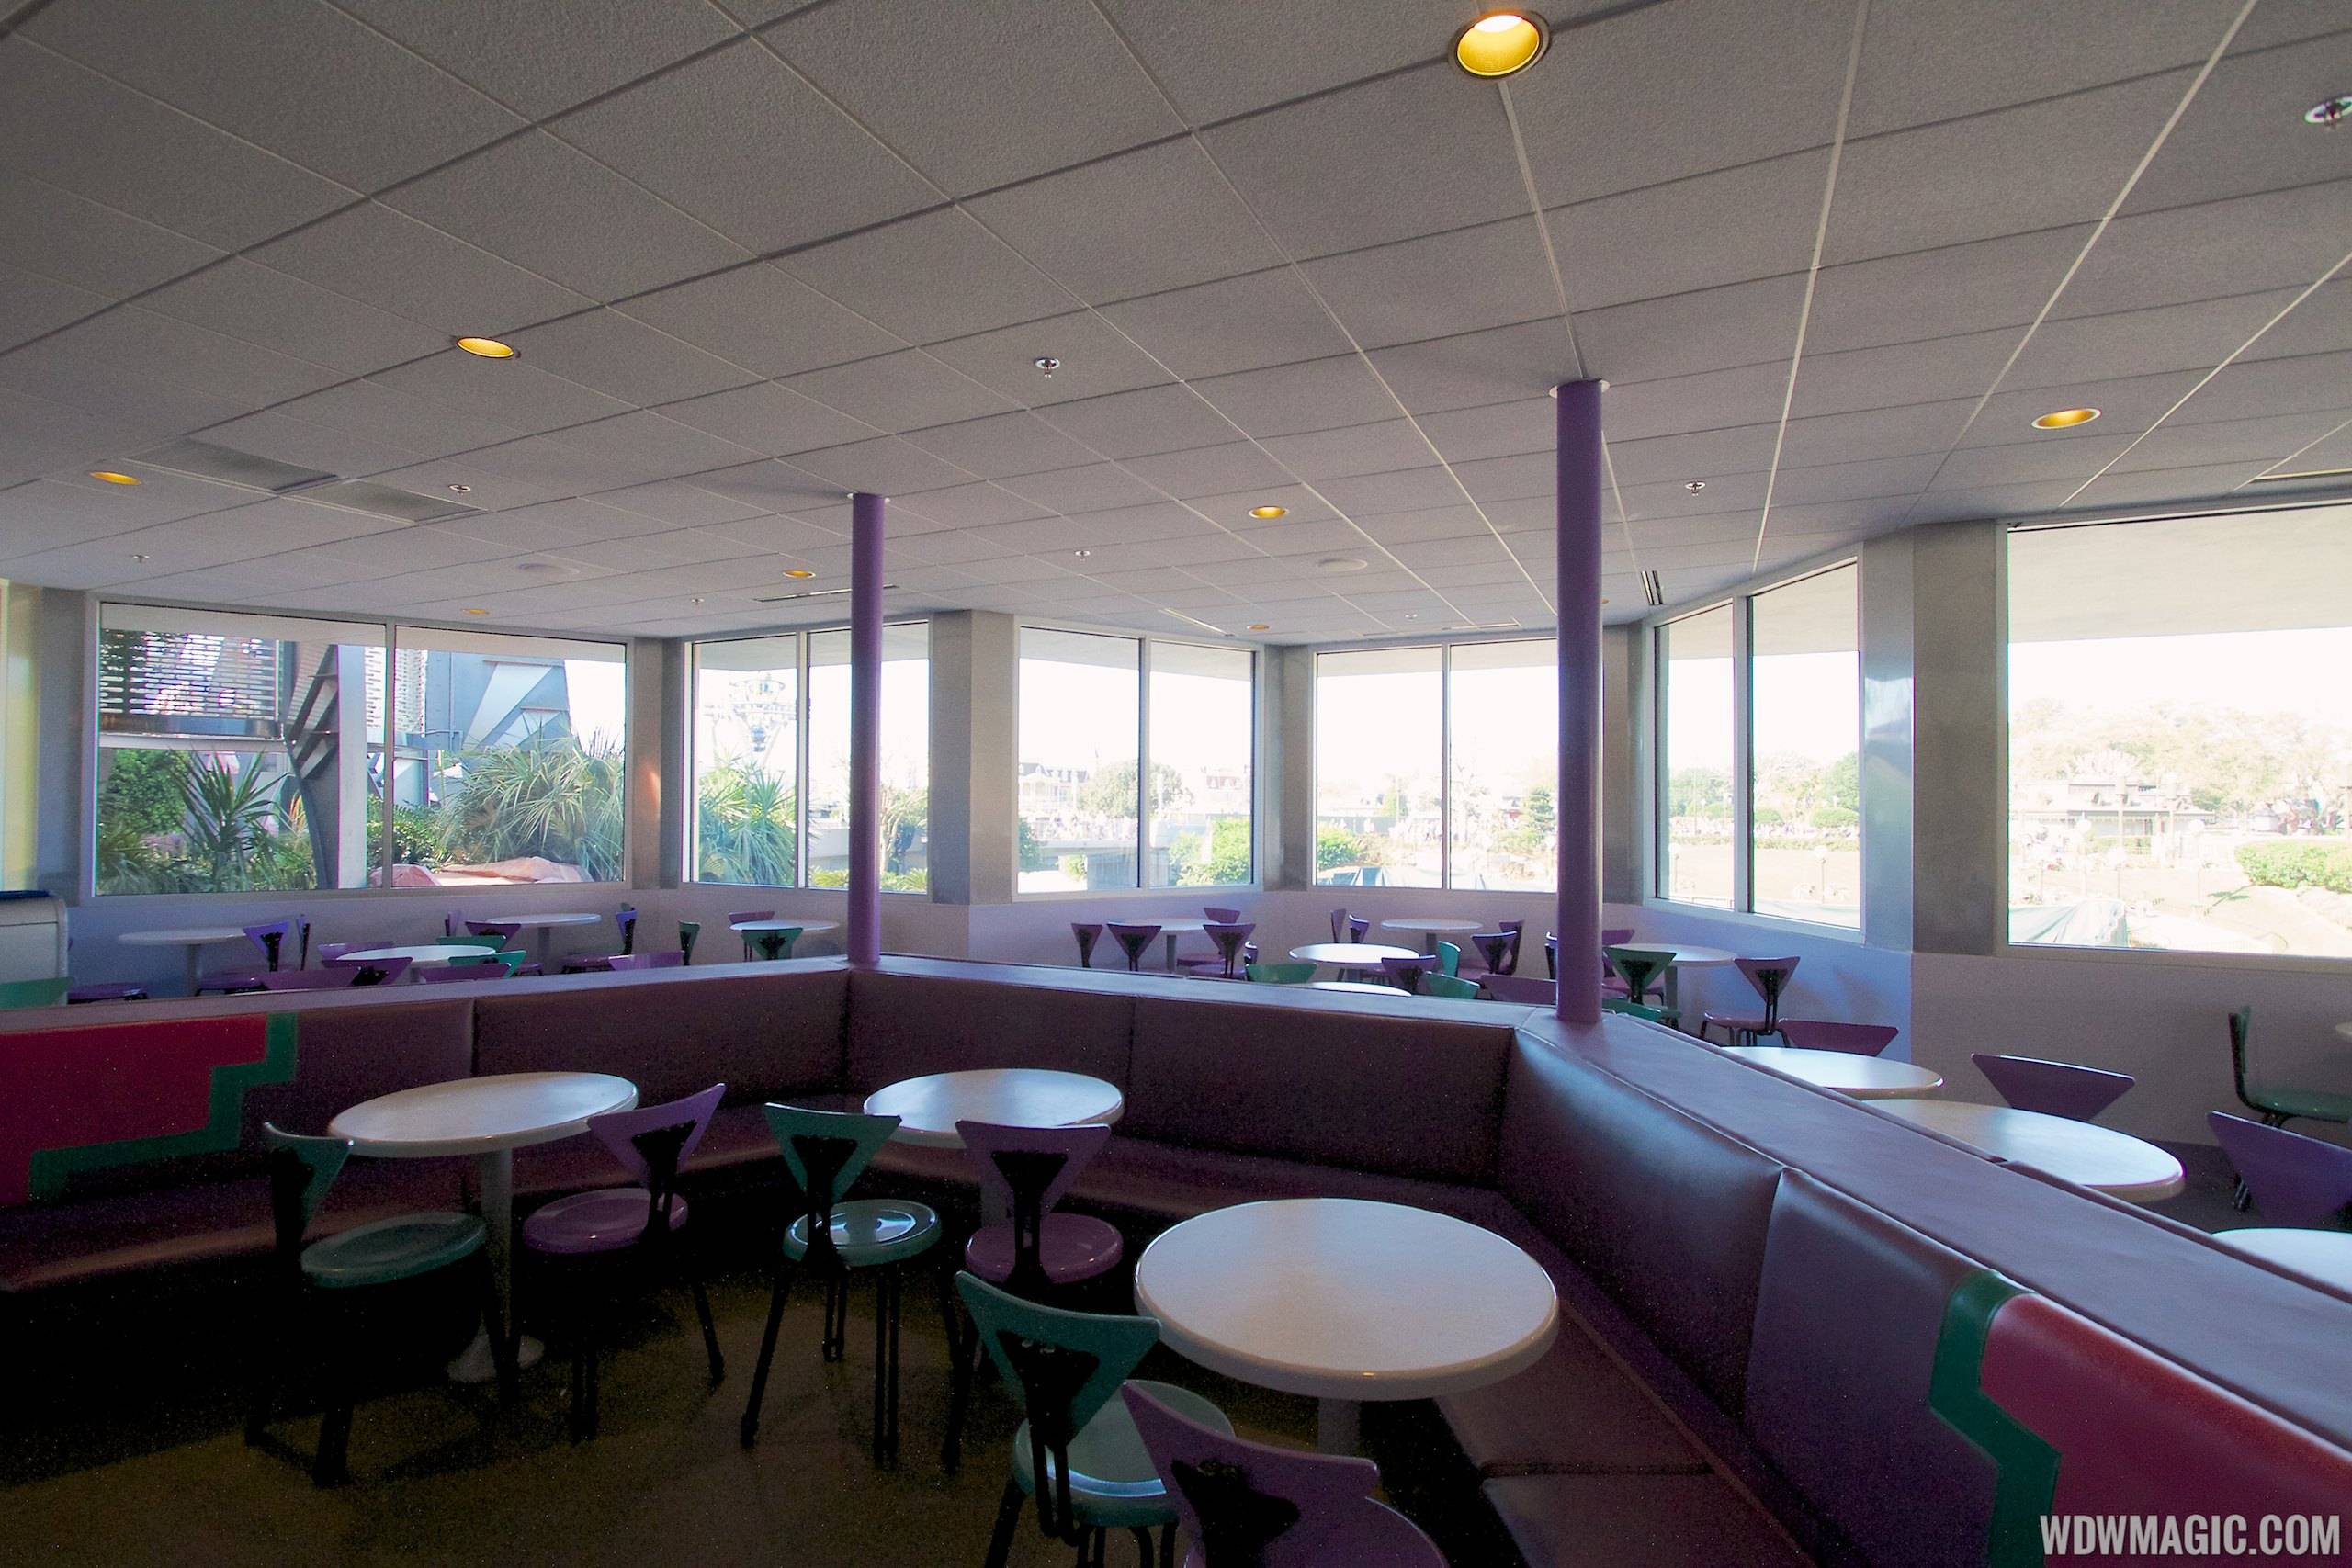 PHOTOS - Cosmic Ray's exterior patio now enclosed and air-conditioned